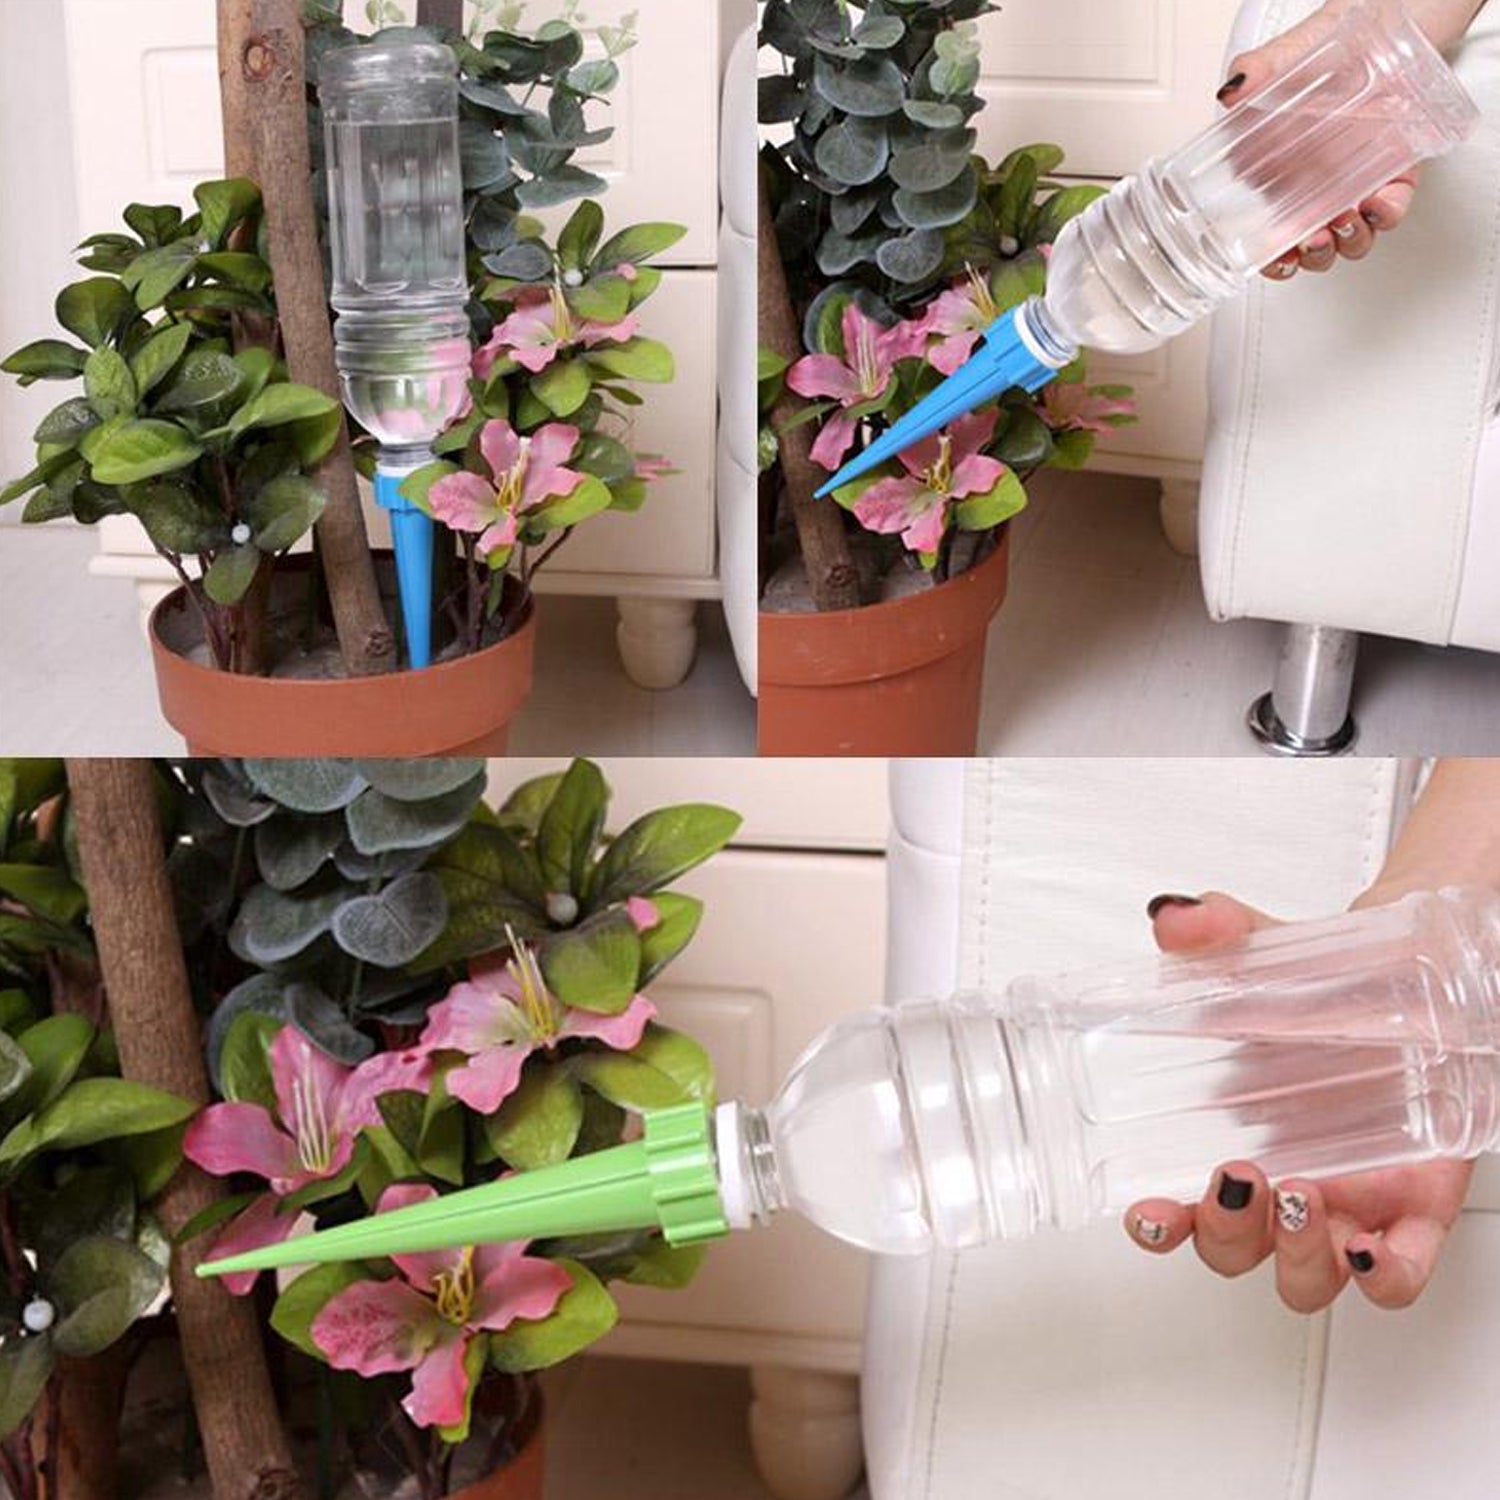 7412 Plant Watering Spikes self Watering Spikes Water dripper for Plants, Adjustable Plant Watering Devices with Slow Release Control Valve Switch (1Pc) DeoDap